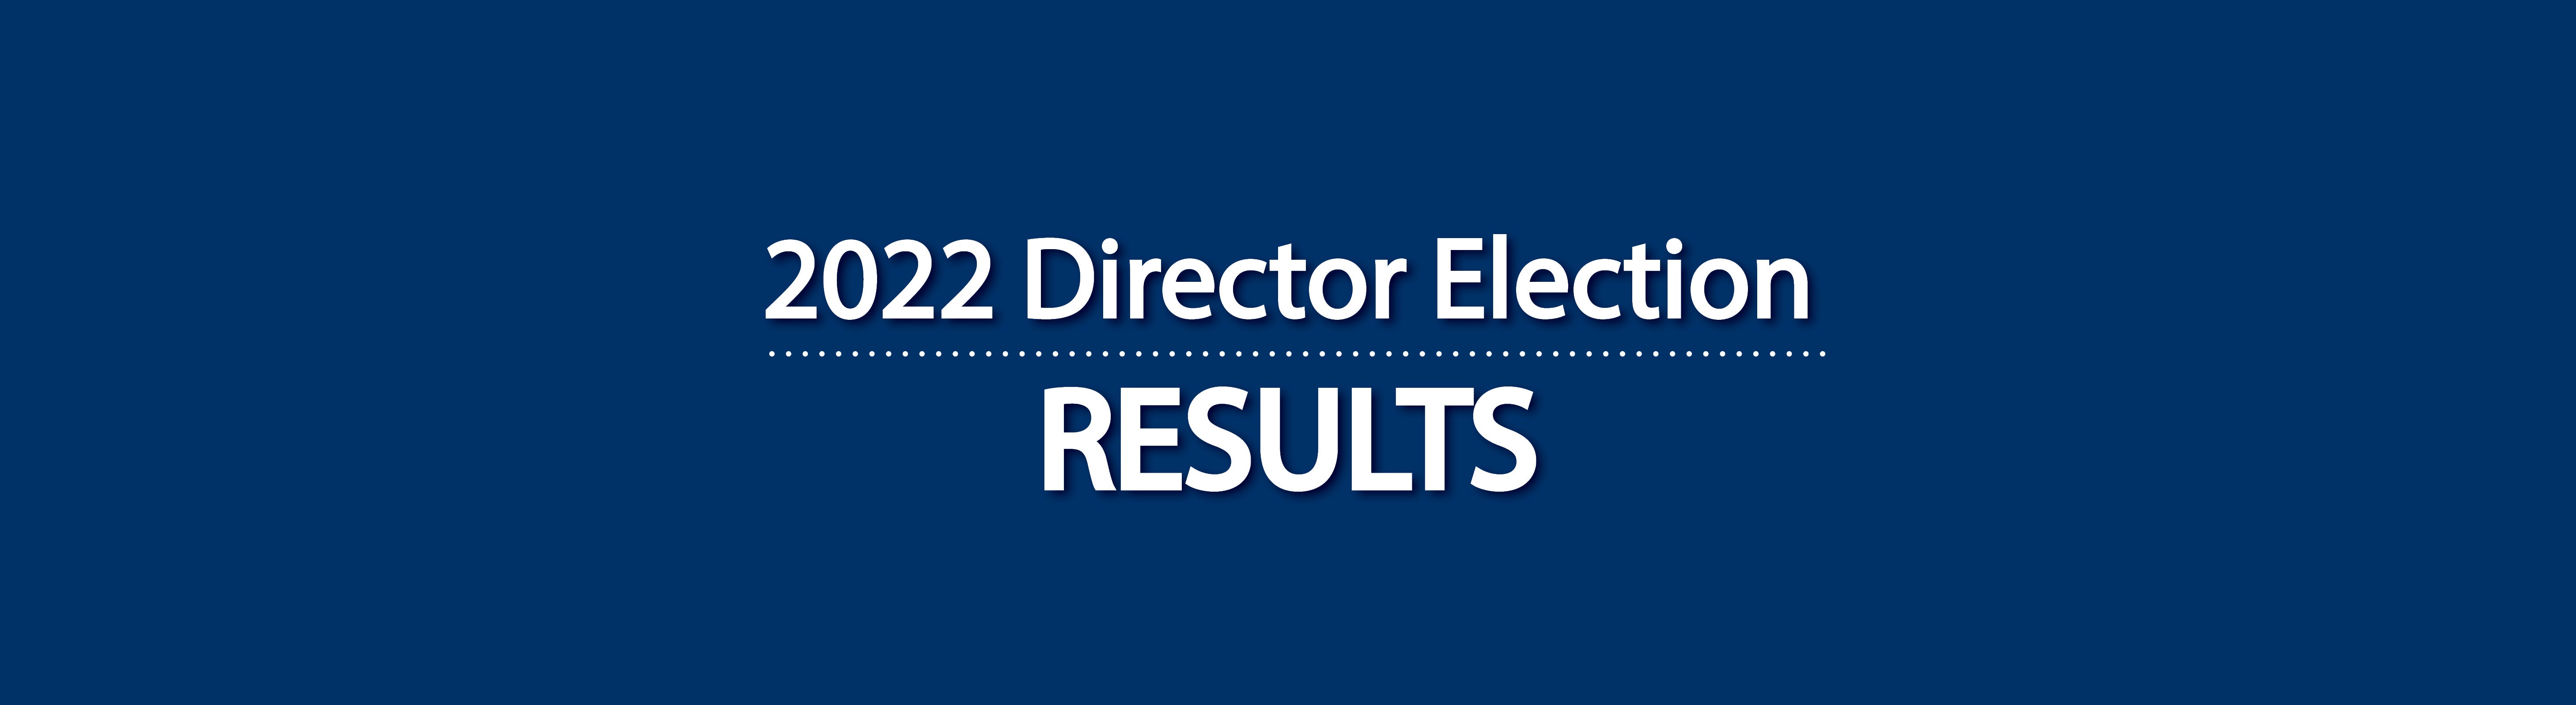 2022 Director Election results